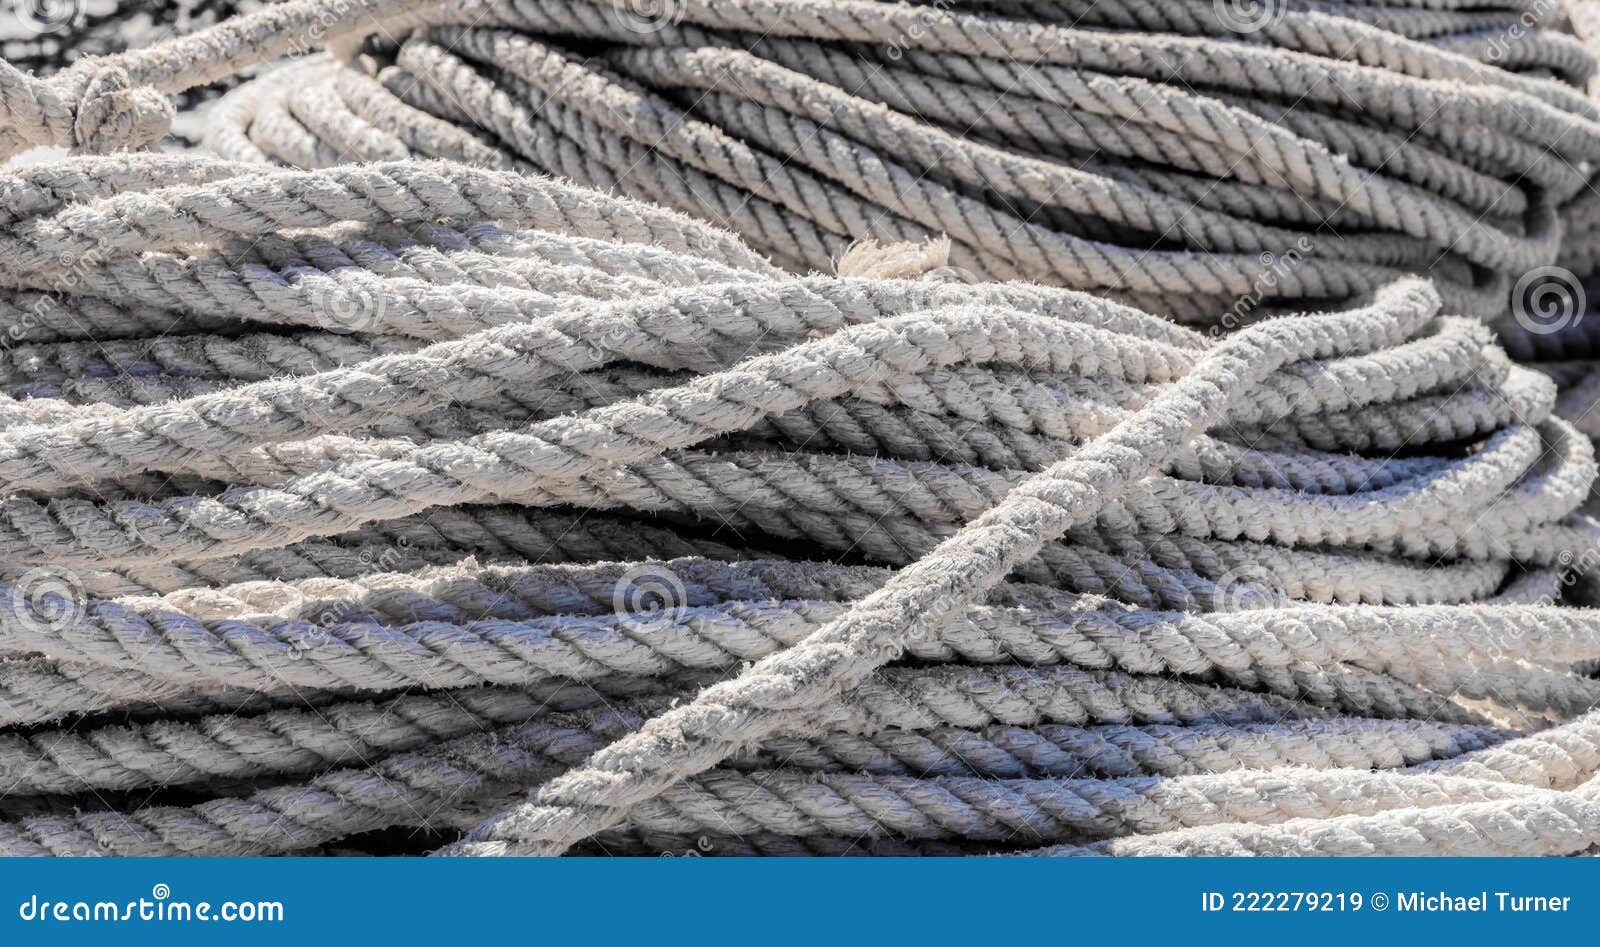 Traditional Fishing Net and Rope on Small Rowing Boat Stock Image